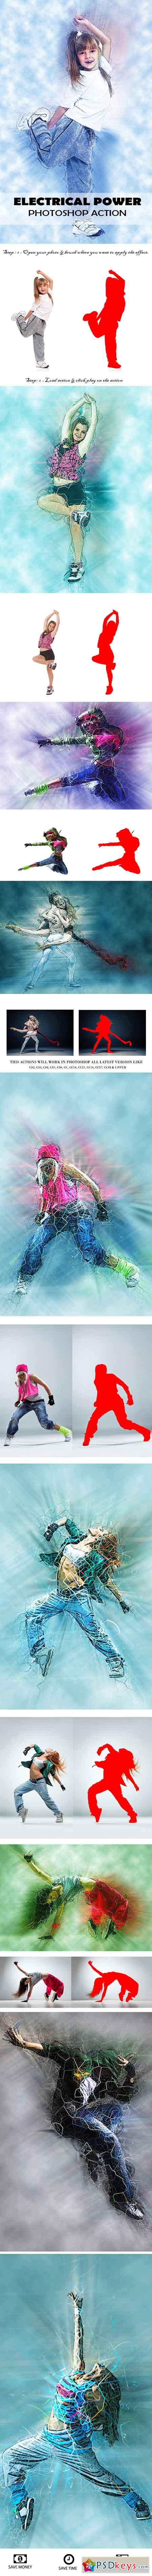 Electrical Power Photoshop Action 22429803